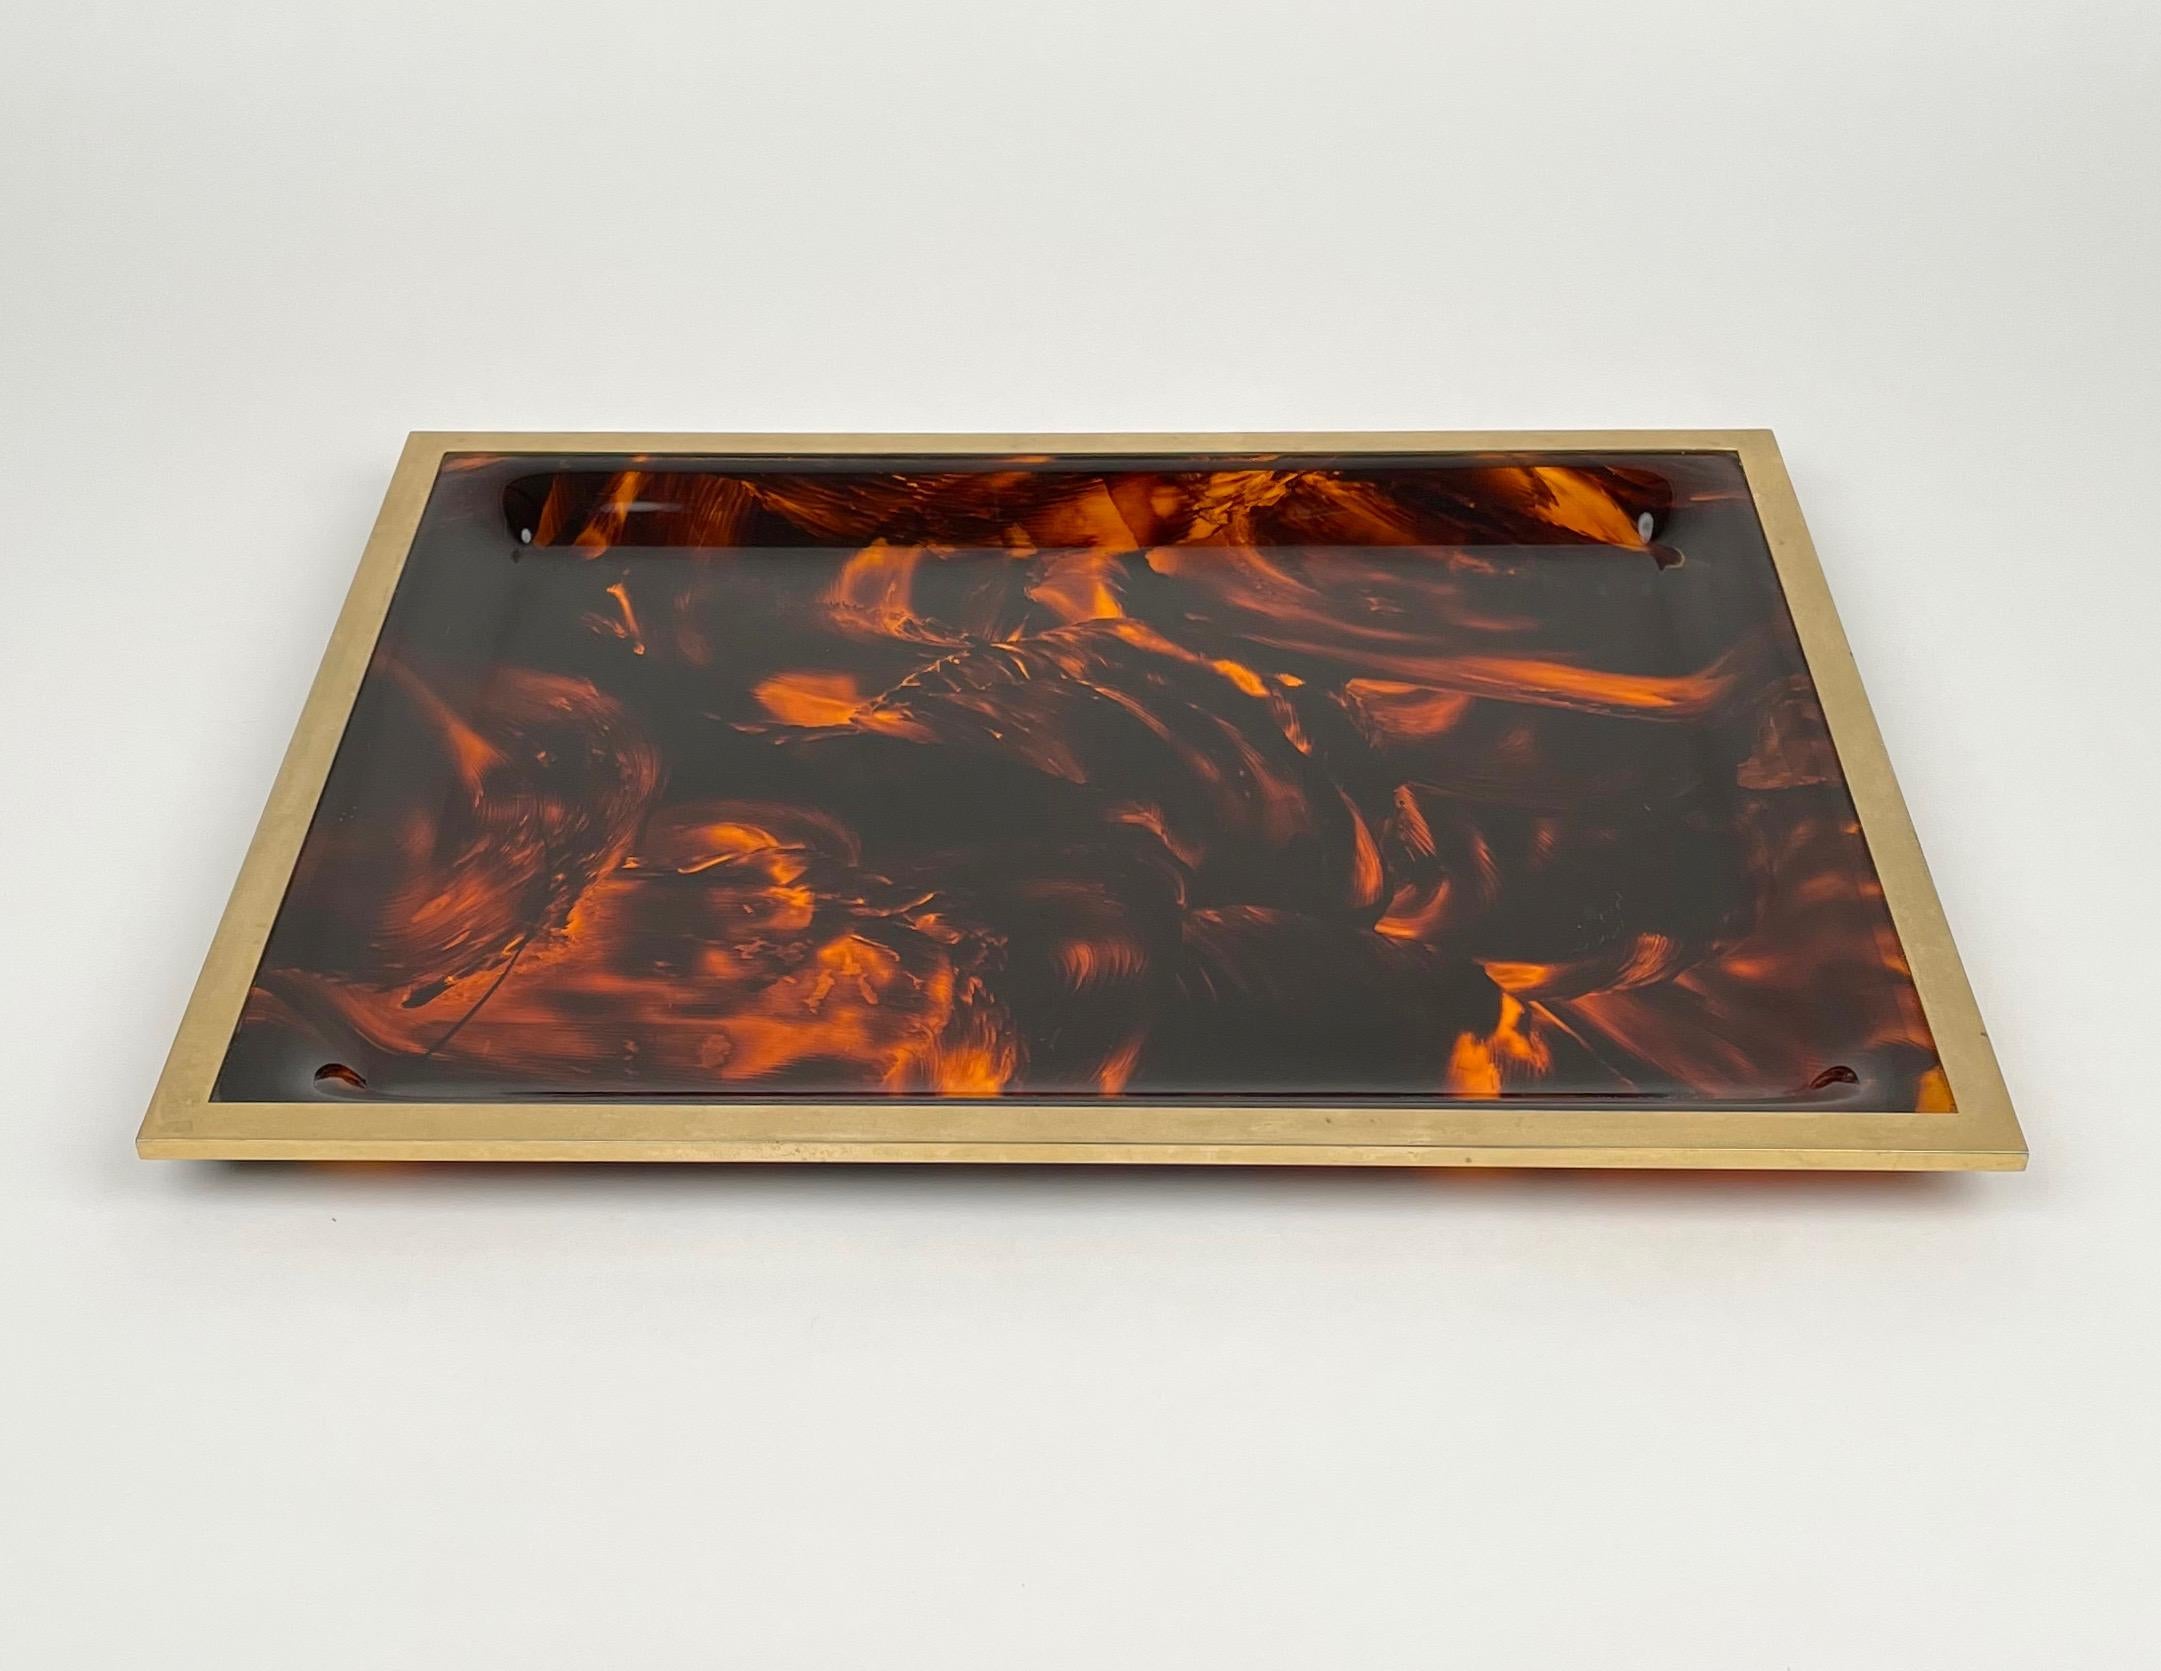 1970s rectangular serving tray centerpiece in tortoiseshell-effect lucite and brass borders by Taitu, Milan, Italy. 

The original label is still attached on the back, as shown in the pictures.